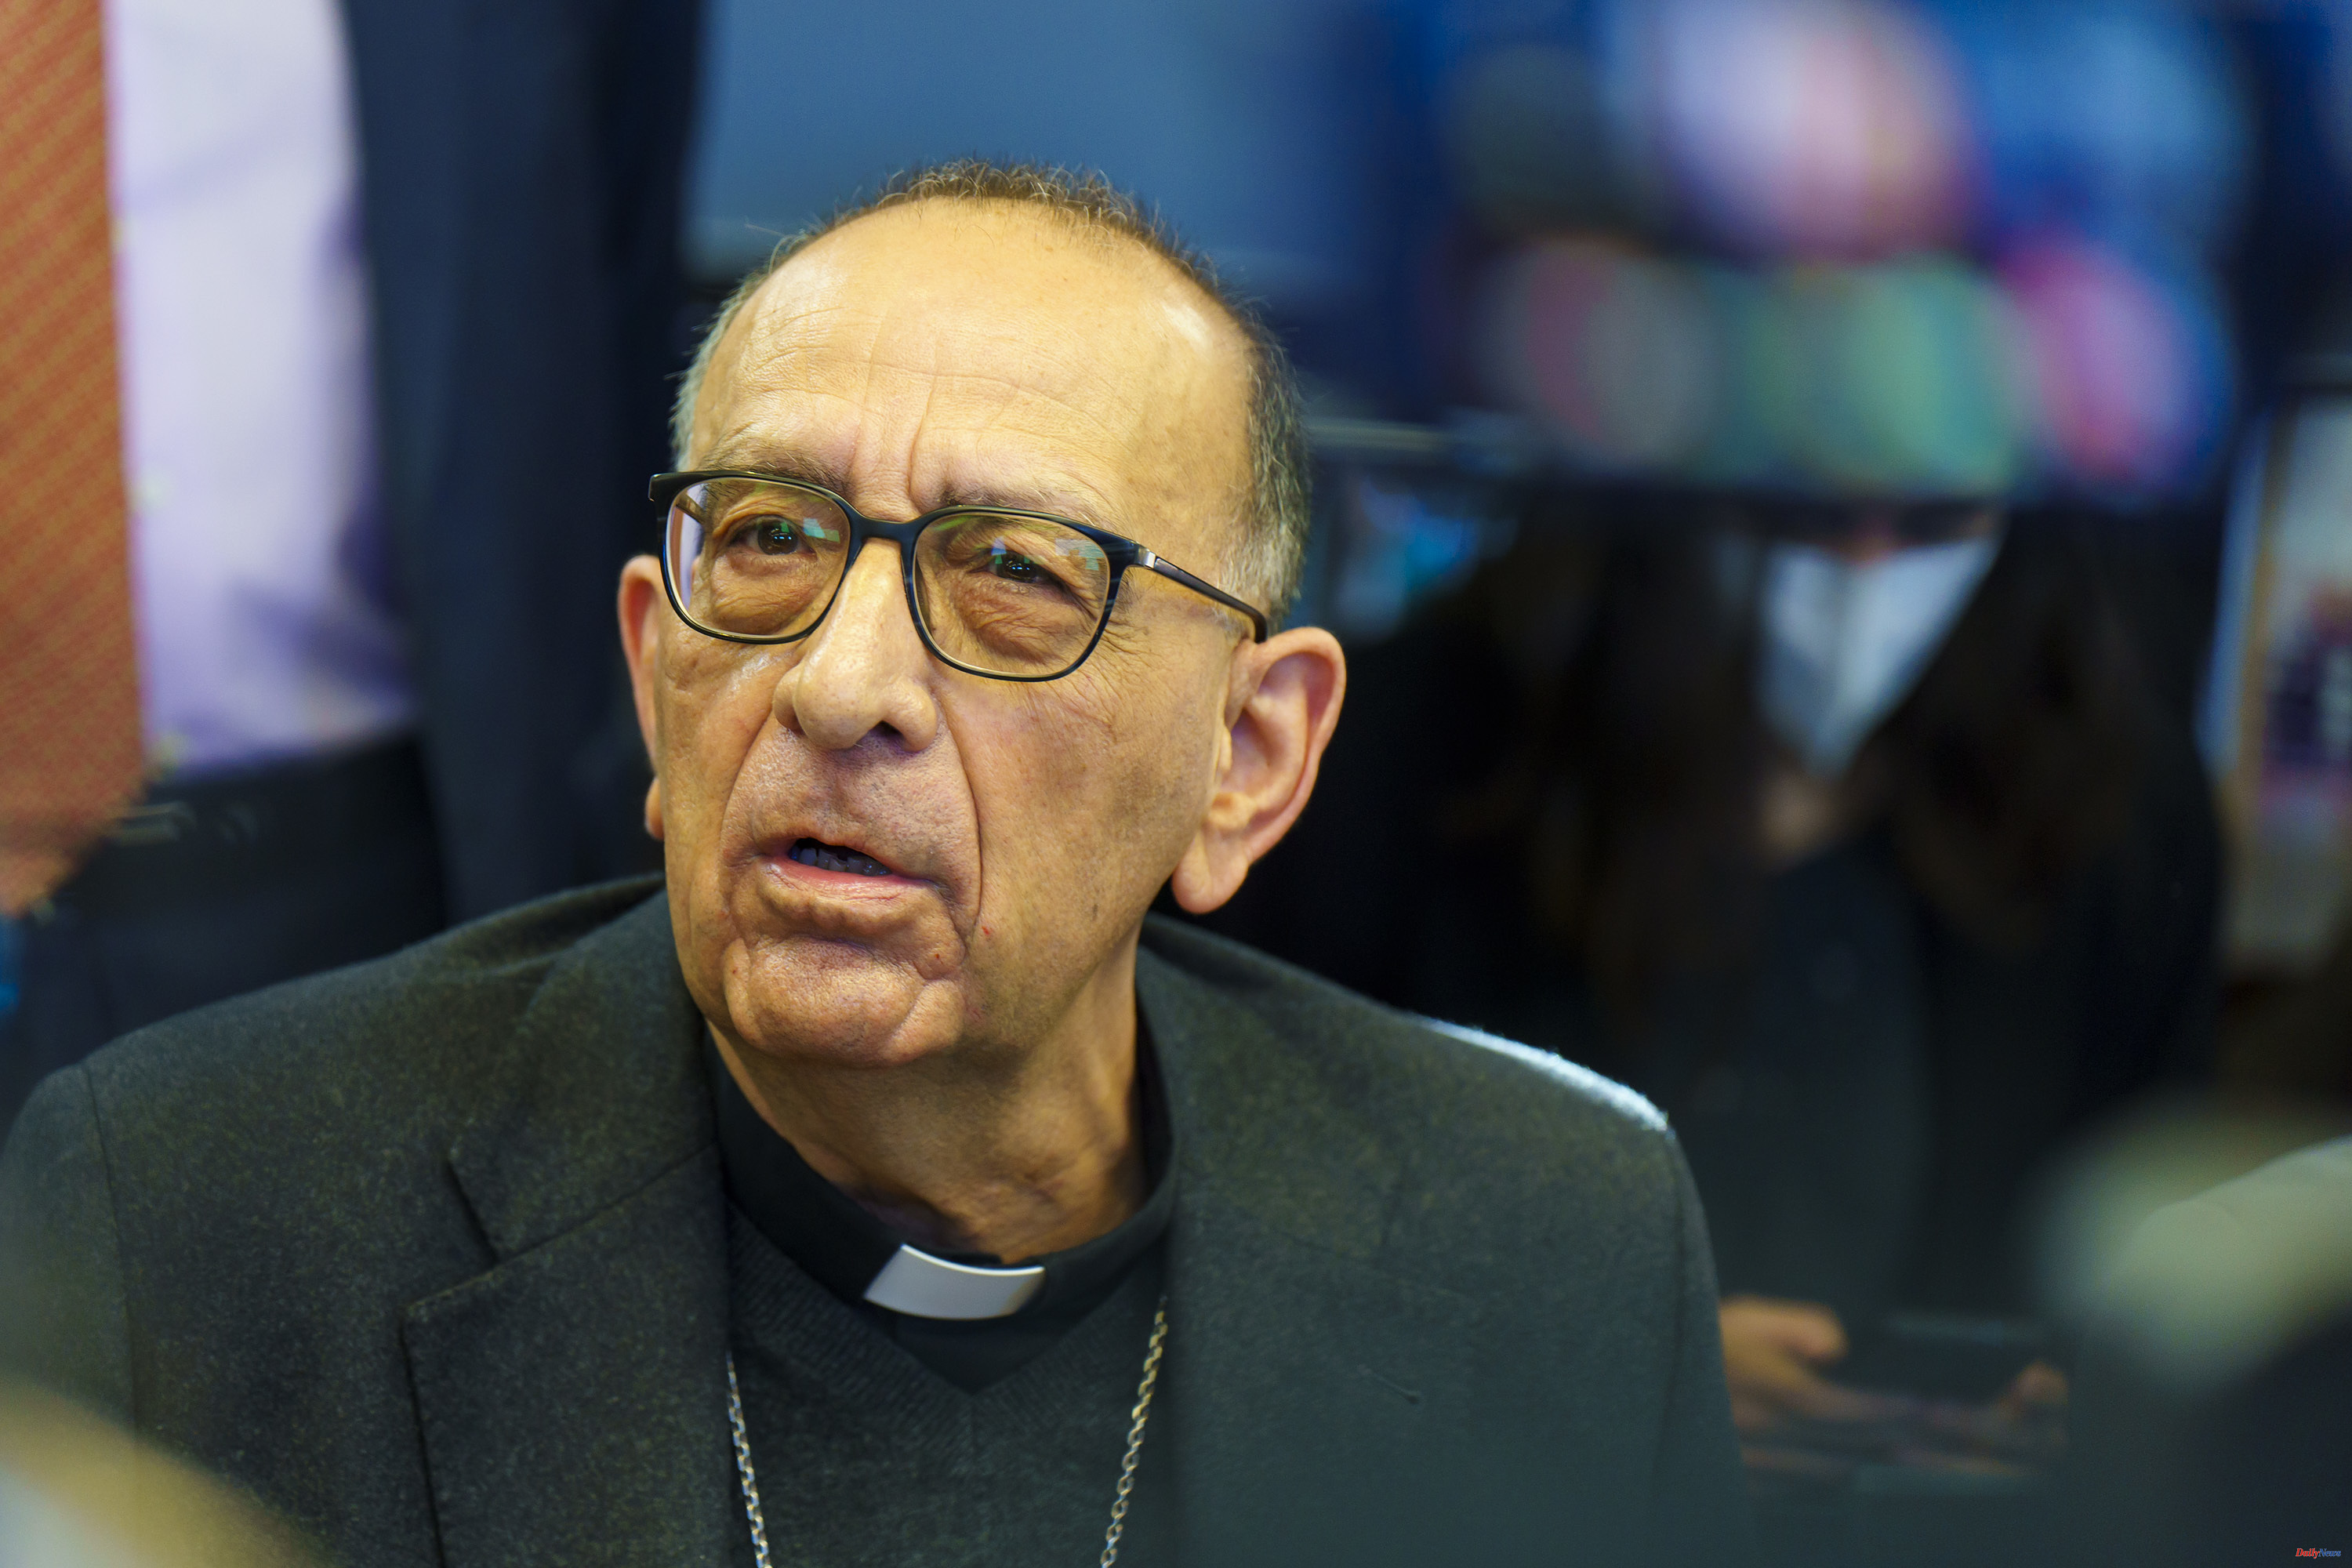 Ana Obregón case The bishops denounce the use of pregnant women "as if they were an incubator"